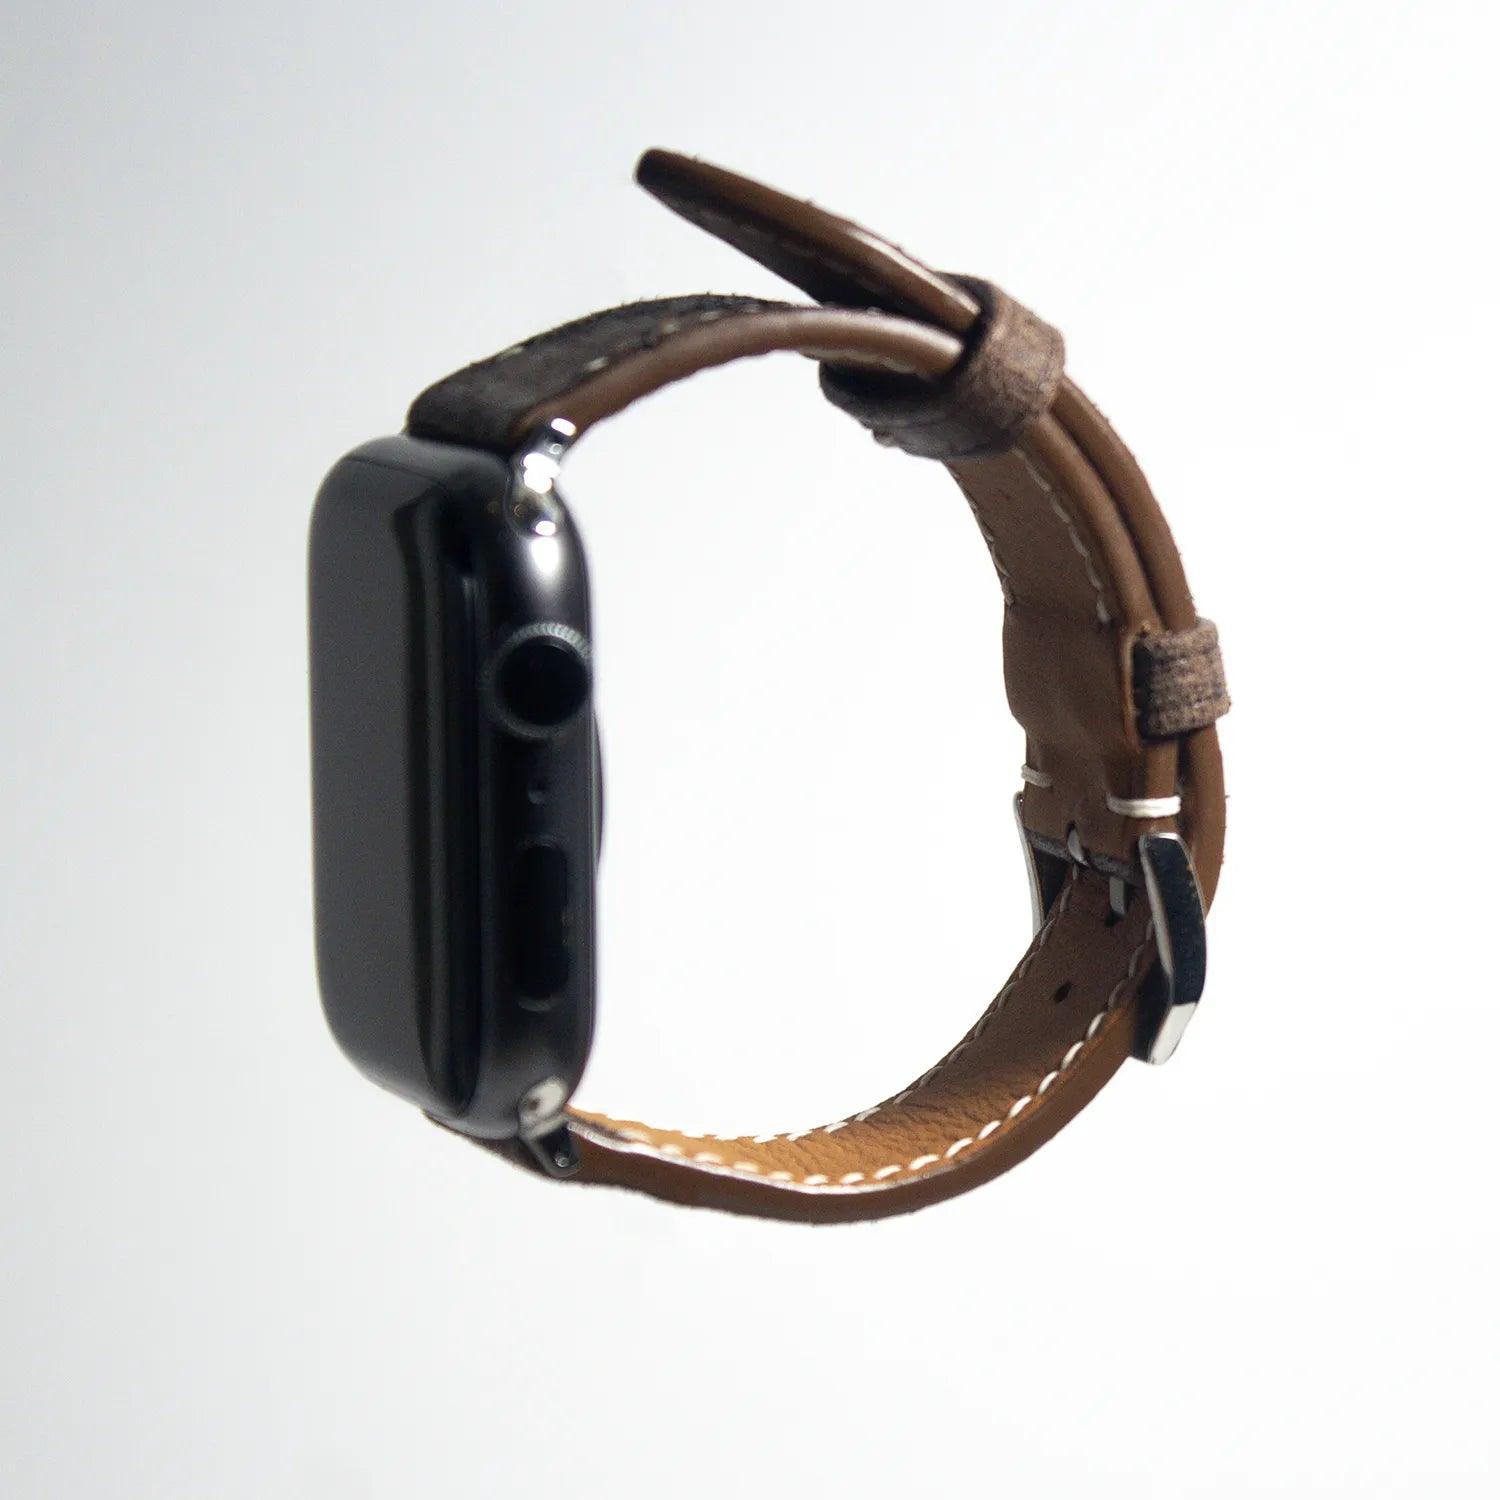 Sophisticated apple watch leather band crafted from durable brown Babele leather for lasting style.